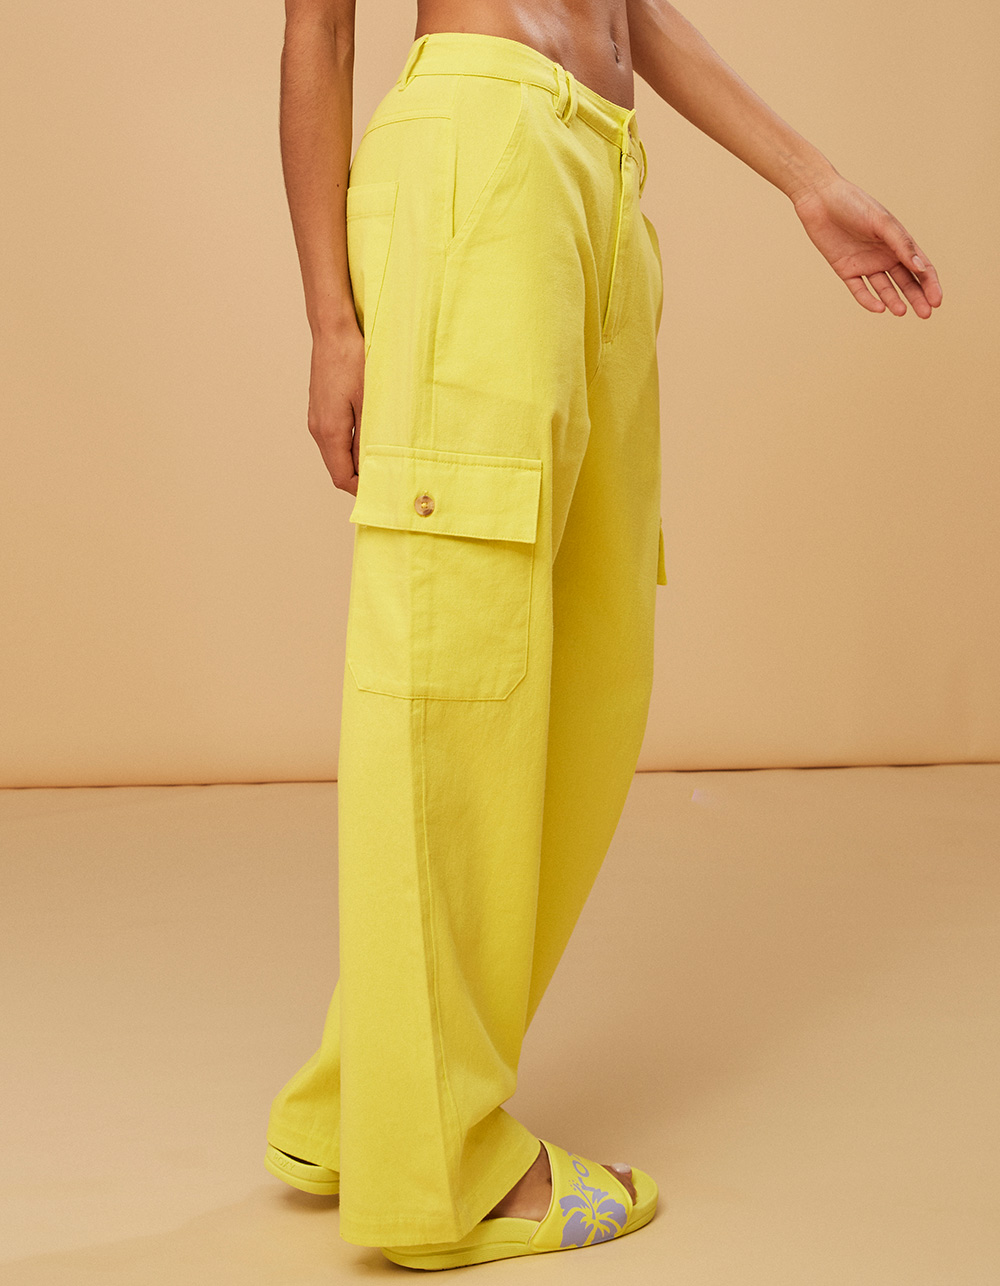 ROXY x Kate Bosworth Surf Kind Kate Womens Cargo Pants - YELLOW | Tillys